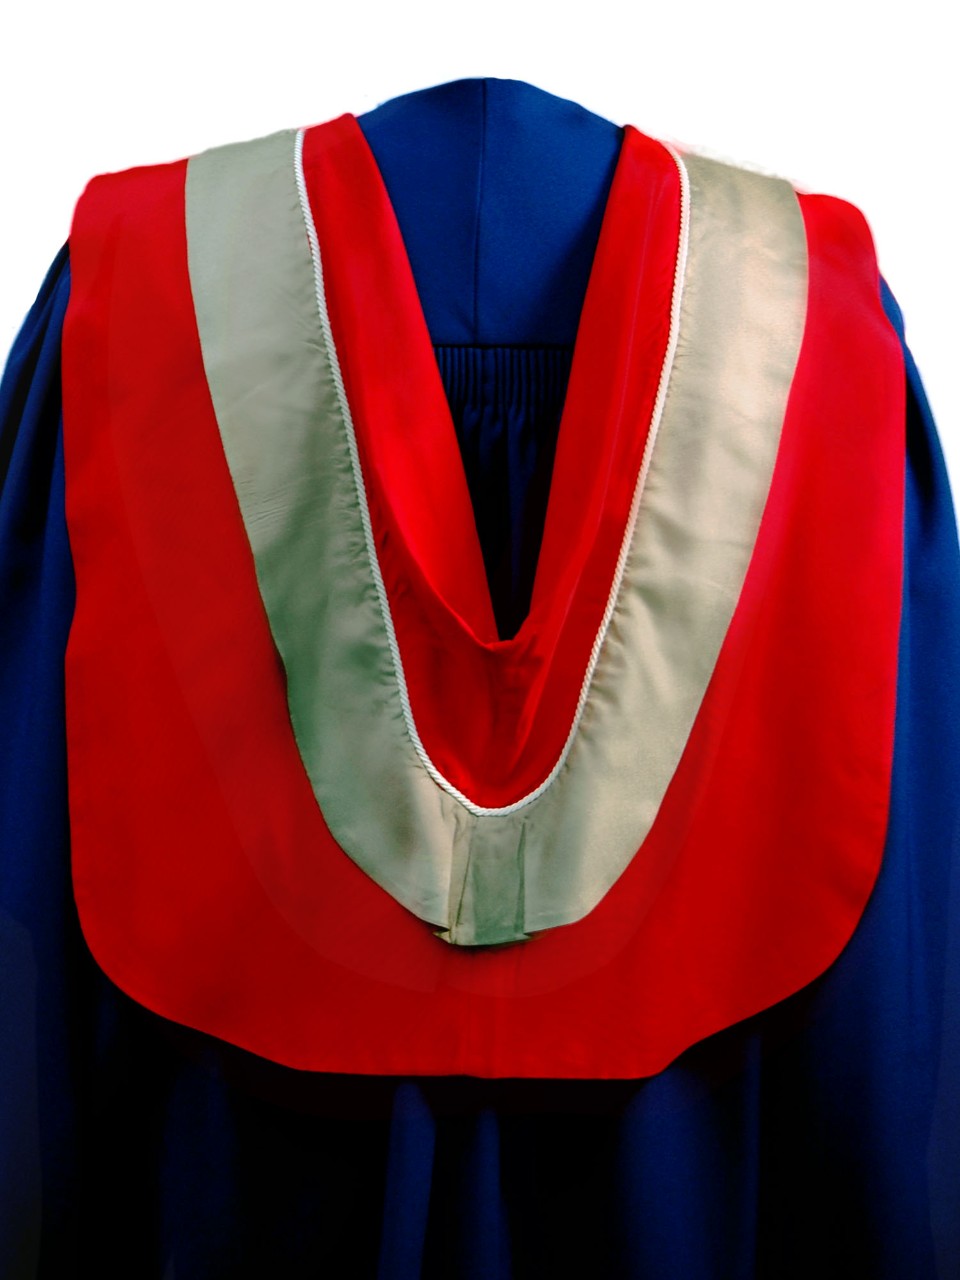 The Master of Science in the Faculty of Communication, Arts and Technology hood is red with wide fawn border and white cording